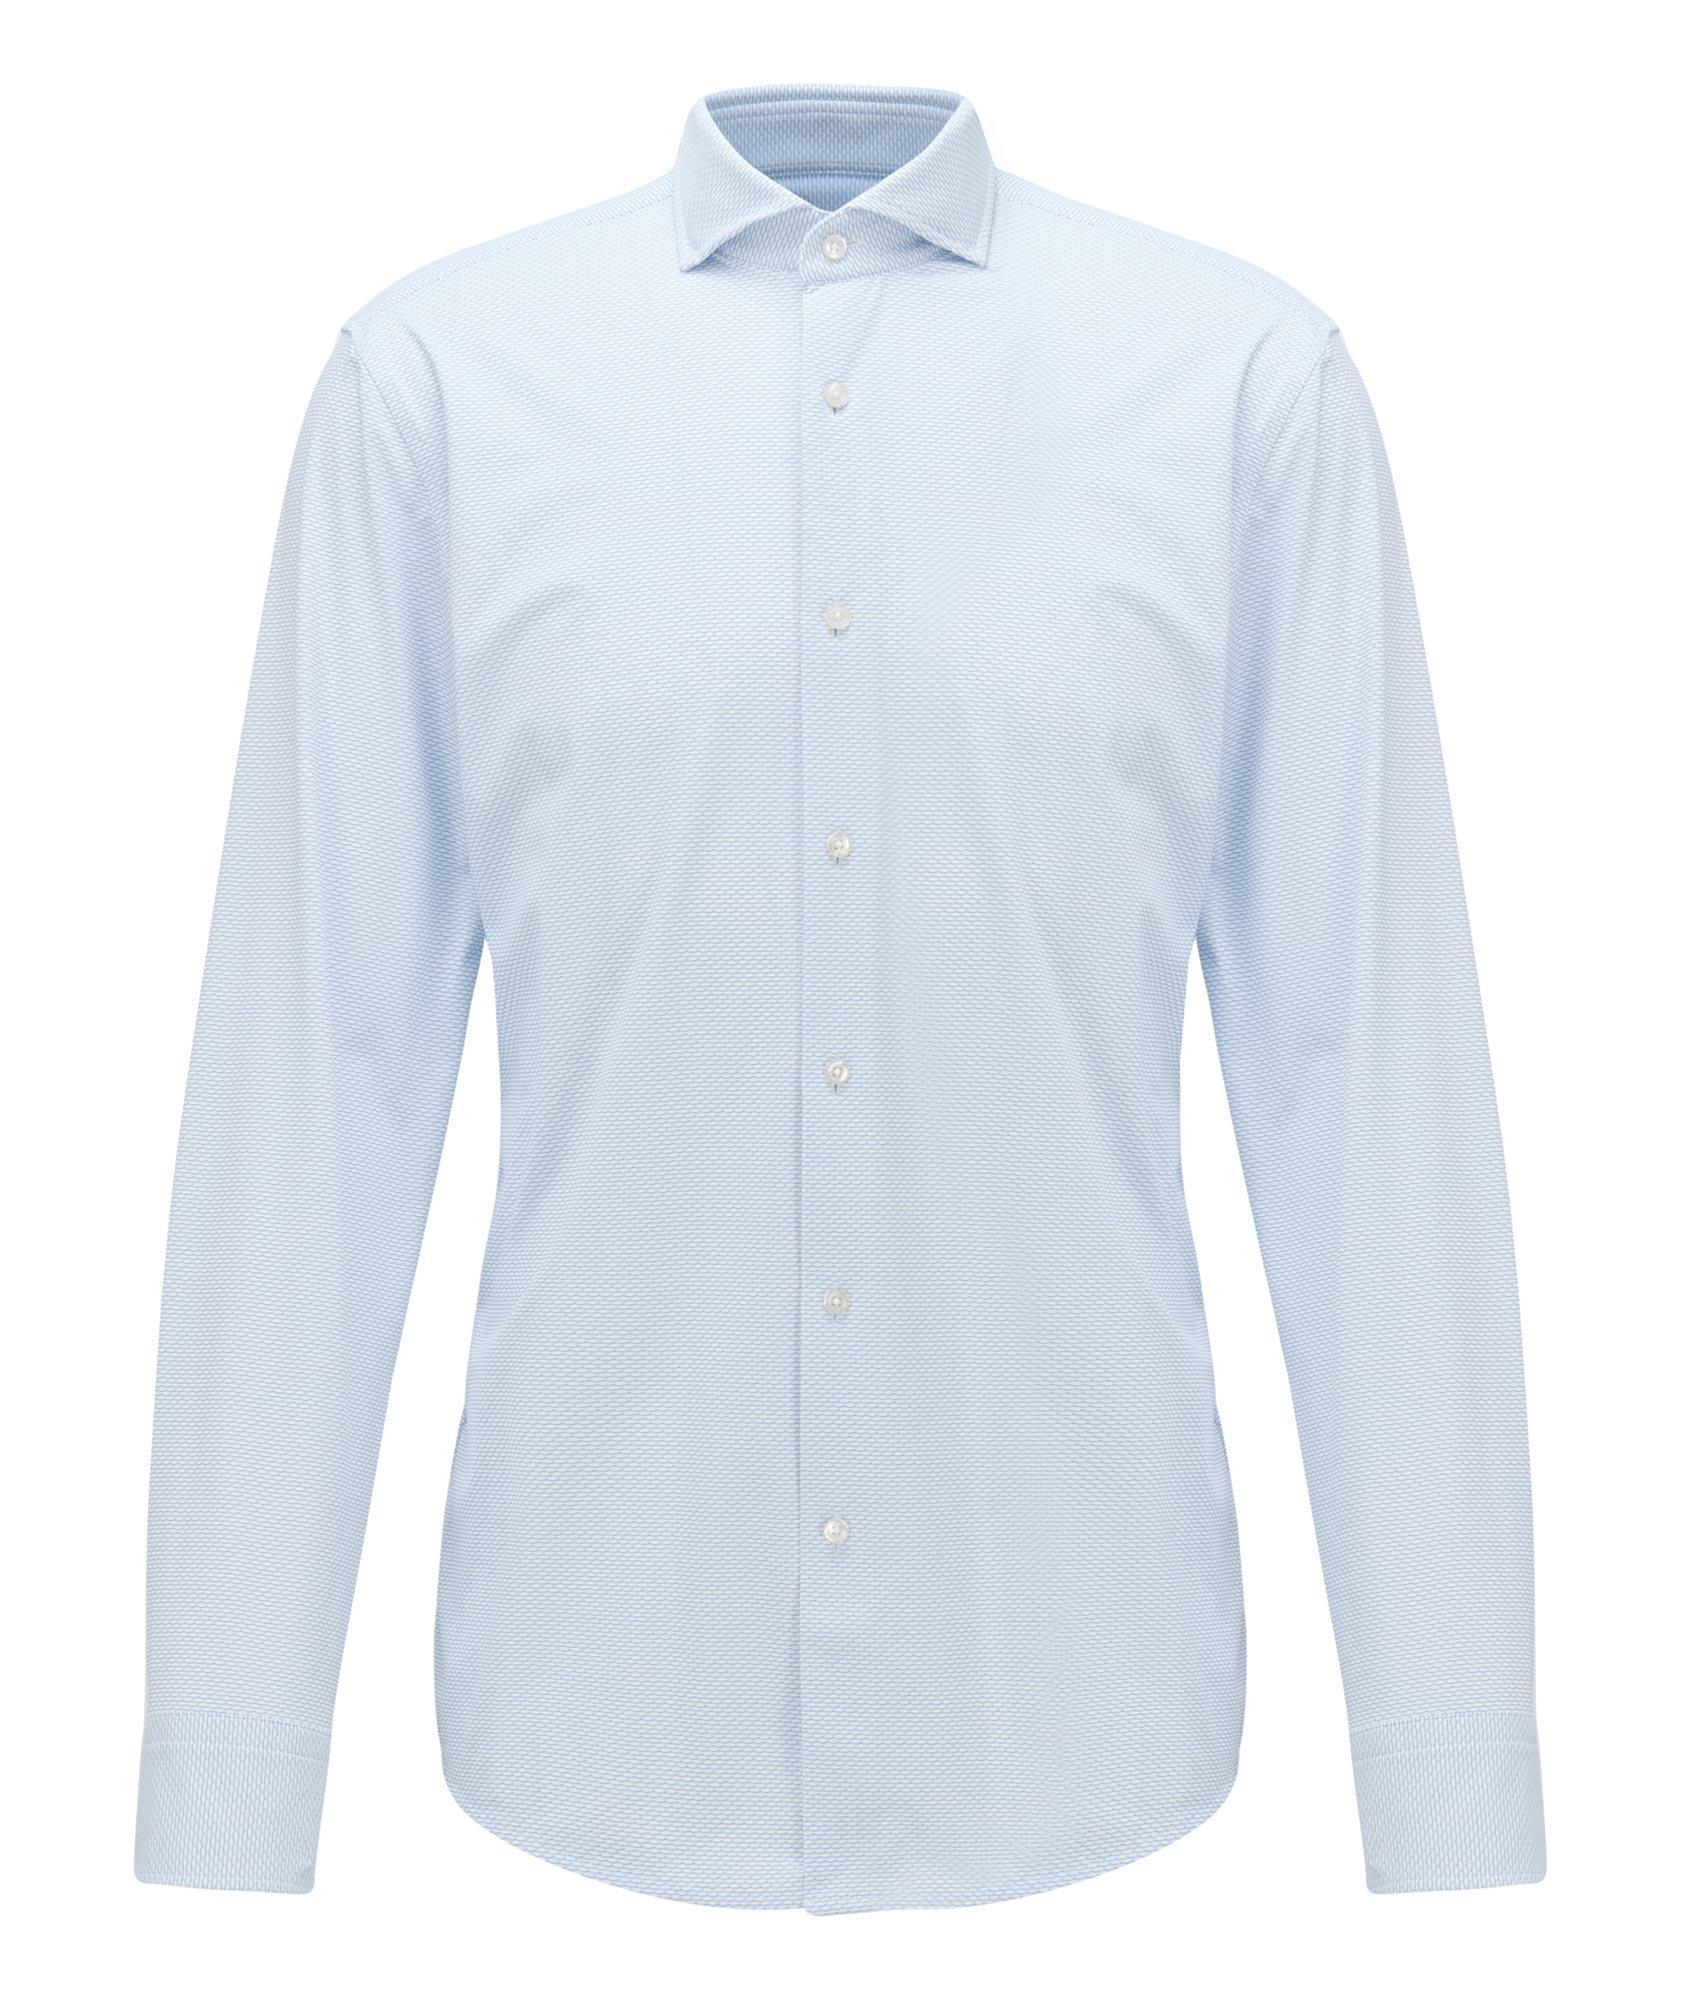 Recycled Stretch-Blend Dress Shirt image 0